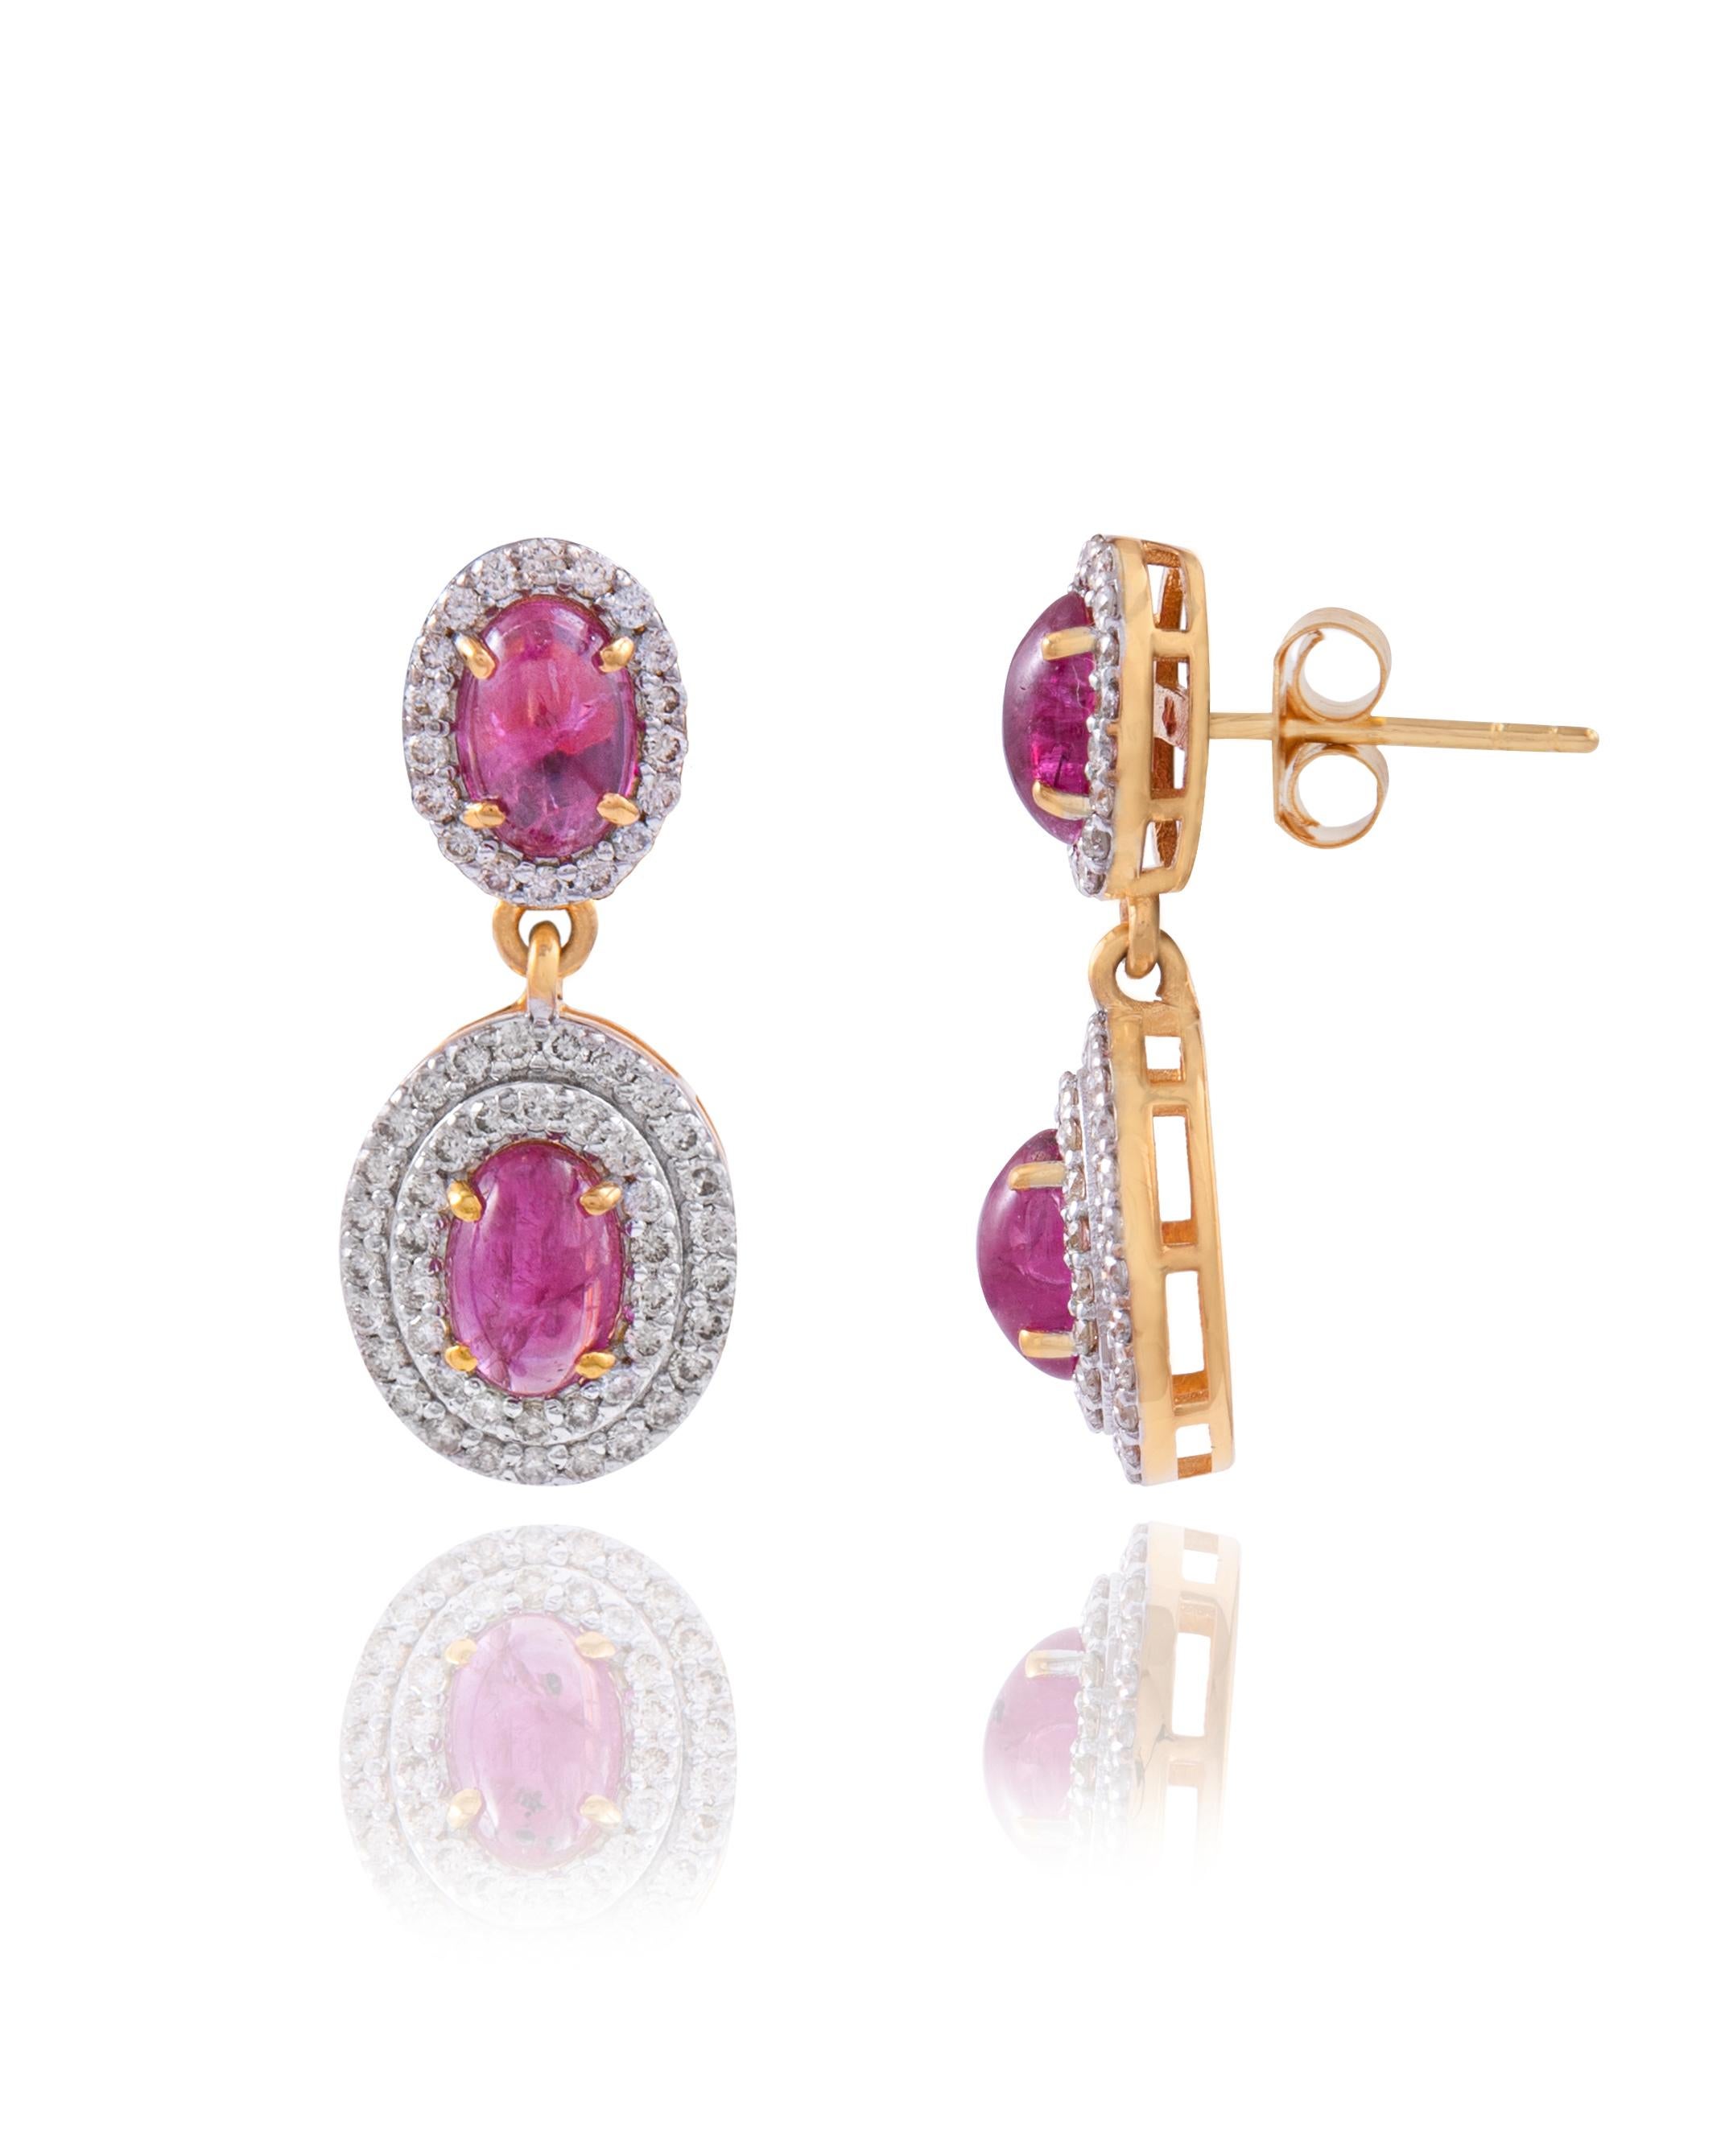  14K Solid Yellow Gold and 0.7 Carat Natural Diamond (G-H Color, SI1-SI2 Purity) Ruby Gemstone, these earrings promise timeless appeal and lasting impressions. A timeless, luxurious yet delicate piece that will make its wearer